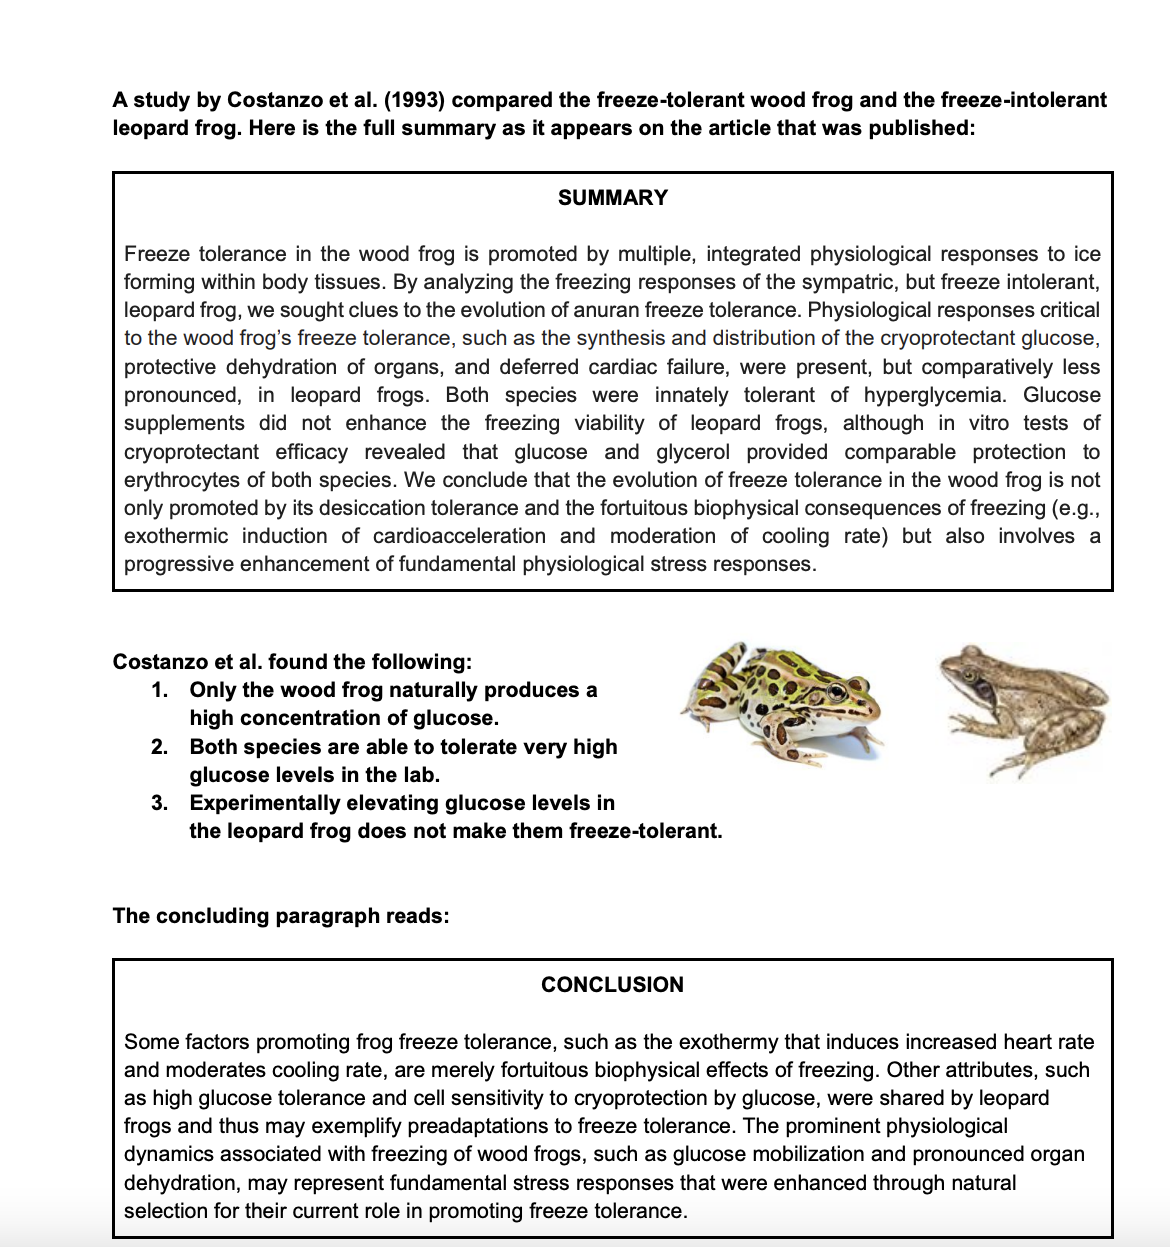 A study by Costanzo et al. (1993) compared the freeze-tolerant wood frog and the freeze-intolerant
leopard frog. Here is the full summary as it appears on the article that was published:
SUMMARY
Freeze tolerance in the wood frog is promoted by multiple, integrated physiological responses to ice
forming within body tissues. By analyzing the freezing responses of the sympatric, but freeze intolerant,
leopard frog, we sought clues to the evolution of anuran freeze tolerance. Physiological responses critical
to the wood frog's freeze tolerance, such as the synthesis and distribution of the cryoprotectant glucose,
protective dehydration of organs, and deferred cardiac failure, were present, but comparatively less
pronounced, in leopard frogs. Both species were innately tolerant of hyperglycemia. Glucose
supplements did not enhance the freezing viability of leopard frogs, although in vitro tests of
cryoprotectant efficacy revealed that glucose and glycerol provided comparable protection to
erythrocytes of both species. We conclude that the evolution of freeze tolerance in the wood frog is not
only promoted by its desiccation tolerance and the fortuitous biophysical consequences of freezing (e.g.,
exothermic induction of cardioacceleration and moderation of cooling rate) but also involves a
progressive enhancement of fundamental physiological stress responses.
Costanzo et al. found the following:
1. Only the wood frog naturally produces a
high concentration of glucose.
2.
Both species are able to tolerate very high
glucose levels in the lab.
3.
Experimentally elevating glucose levels in
the leopard frog does not make them freeze-tolerant.
The concluding paragraph reads:
CONCLUSION
Some factors promoting frog freeze tolerance, such as the exothermy that induces increased heart rate
and moderates cooling rate, are merely fortuitous biophysical effects of freezing. Other attributes, such
as high glucose tolerance and cell sensitivity to cryoprotection by glucose, were shared by leopard
frogs and thus may exemplify preadaptations to freeze tolerance. The prominent physiological
dynamics associated with freezing of wood frogs, such as glucose mobilization and pronounced organ
dehydration, may represent fundamental stress responses that were enhanced through natural
selection for their current role in promoting freeze tolerance.